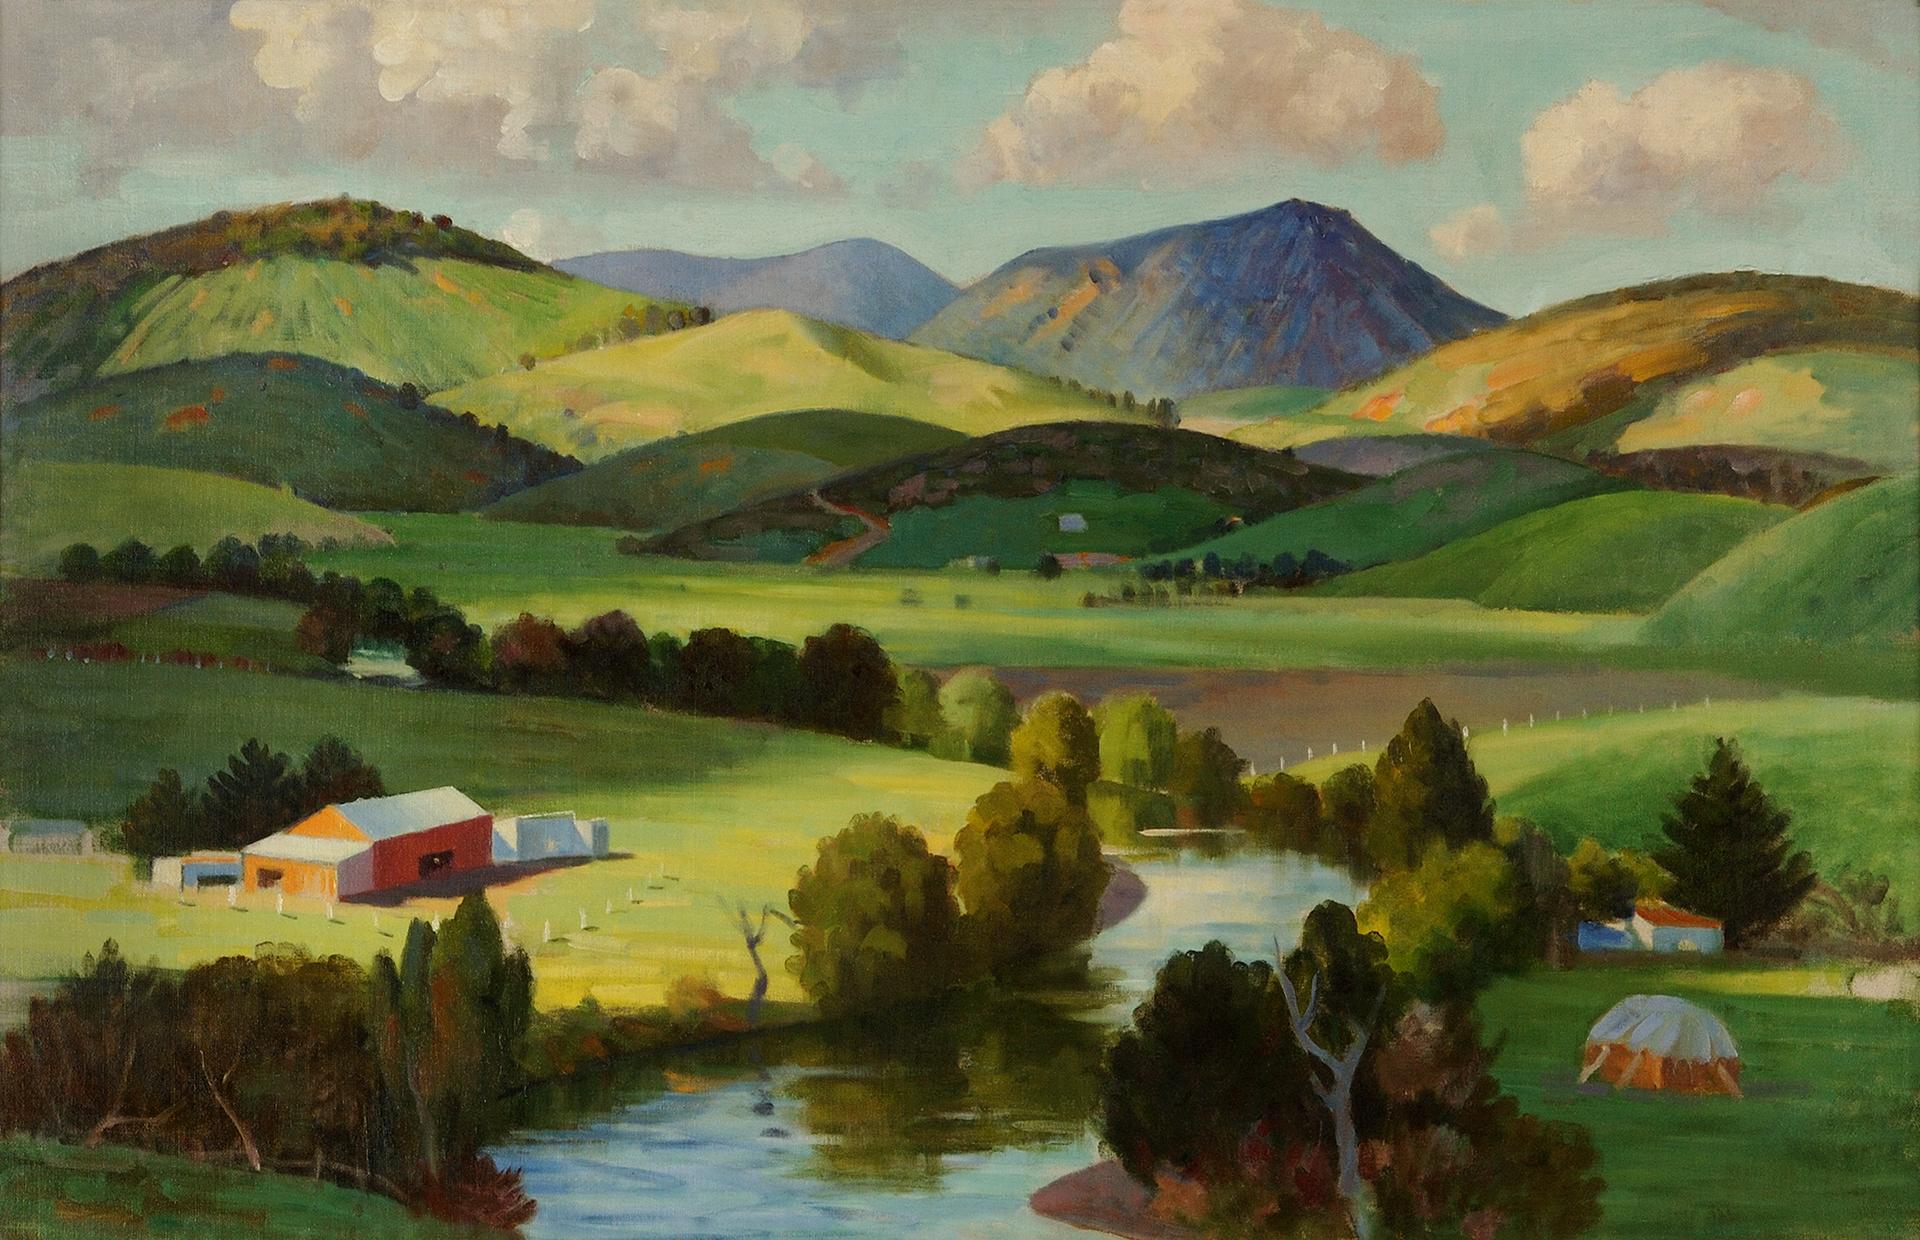 John Weeks Untitled (Landscape) (c 1935) oil on canvas on board Collection of Aratoi Wairarapa Museum of Art and History. Gift of Ministry of Foreign Affairs and Trade. 